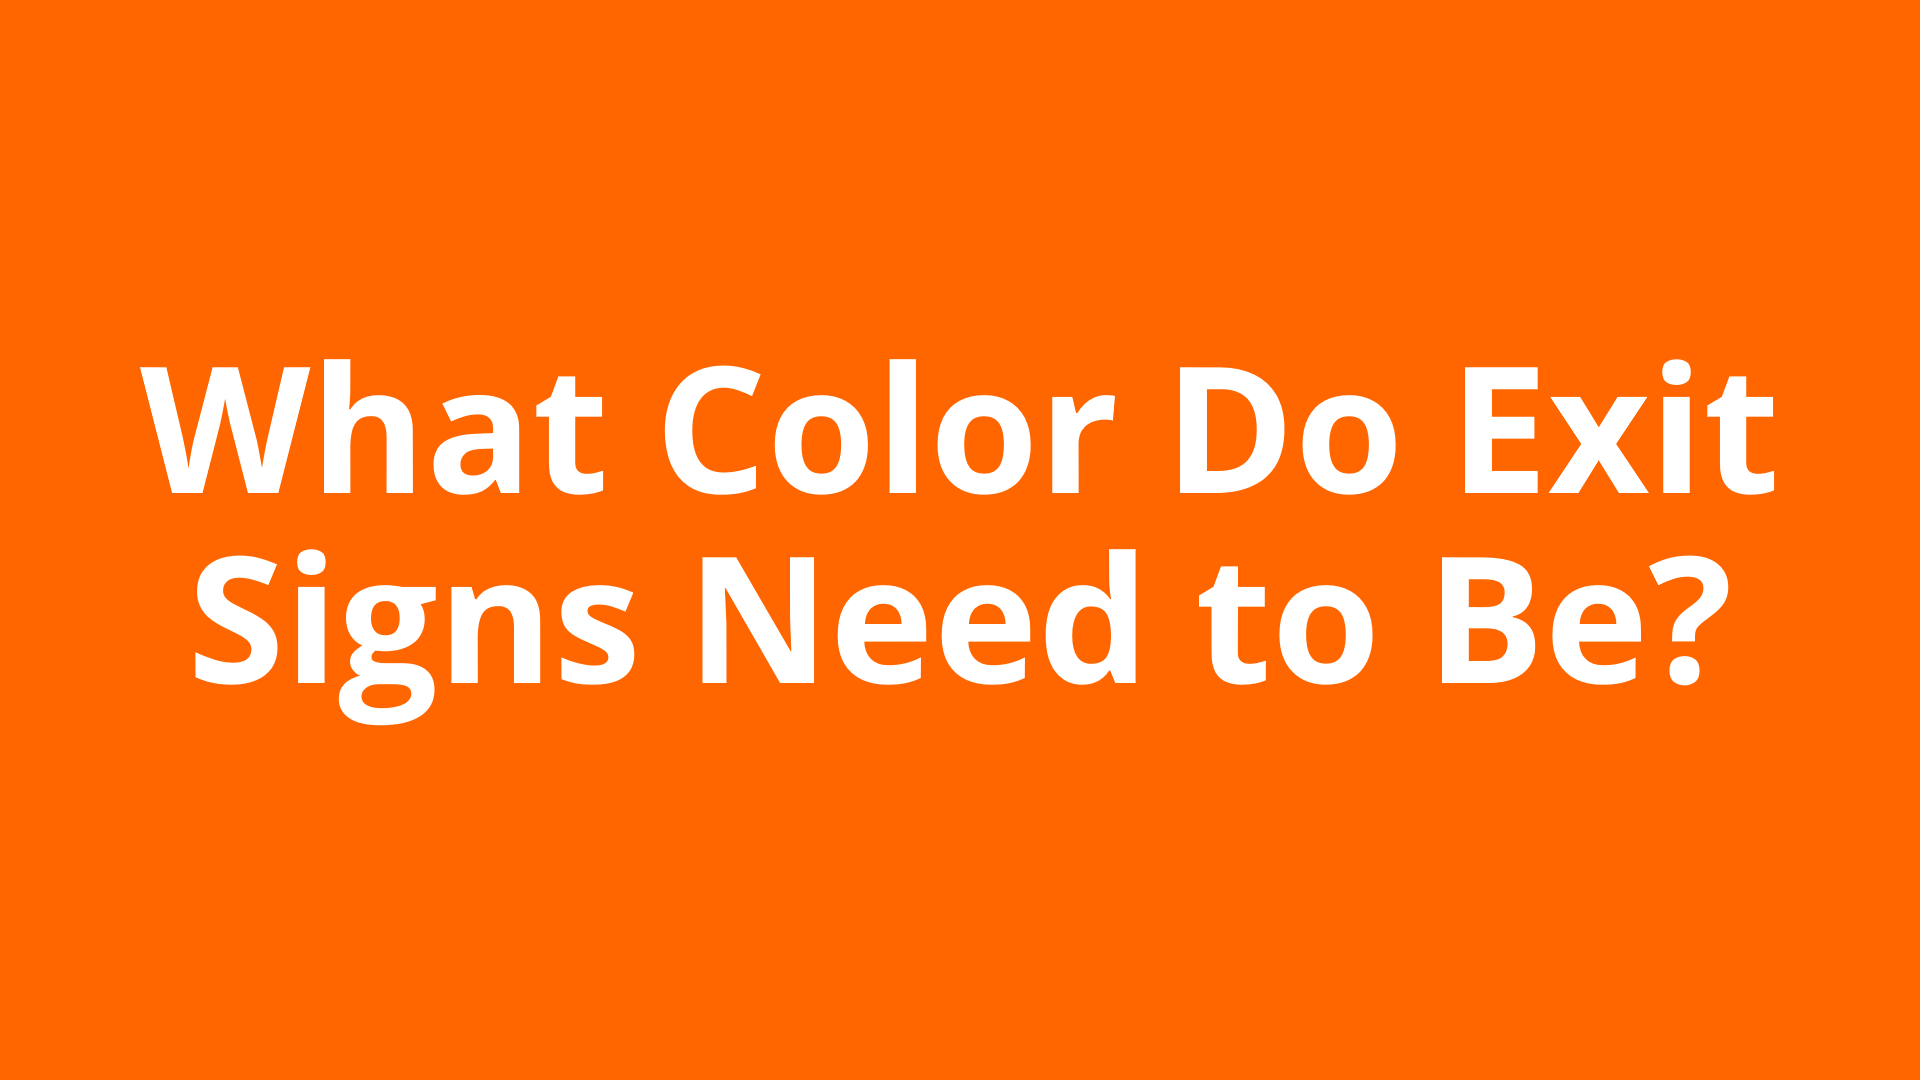 What Color Do Exit Signs Need to Be?